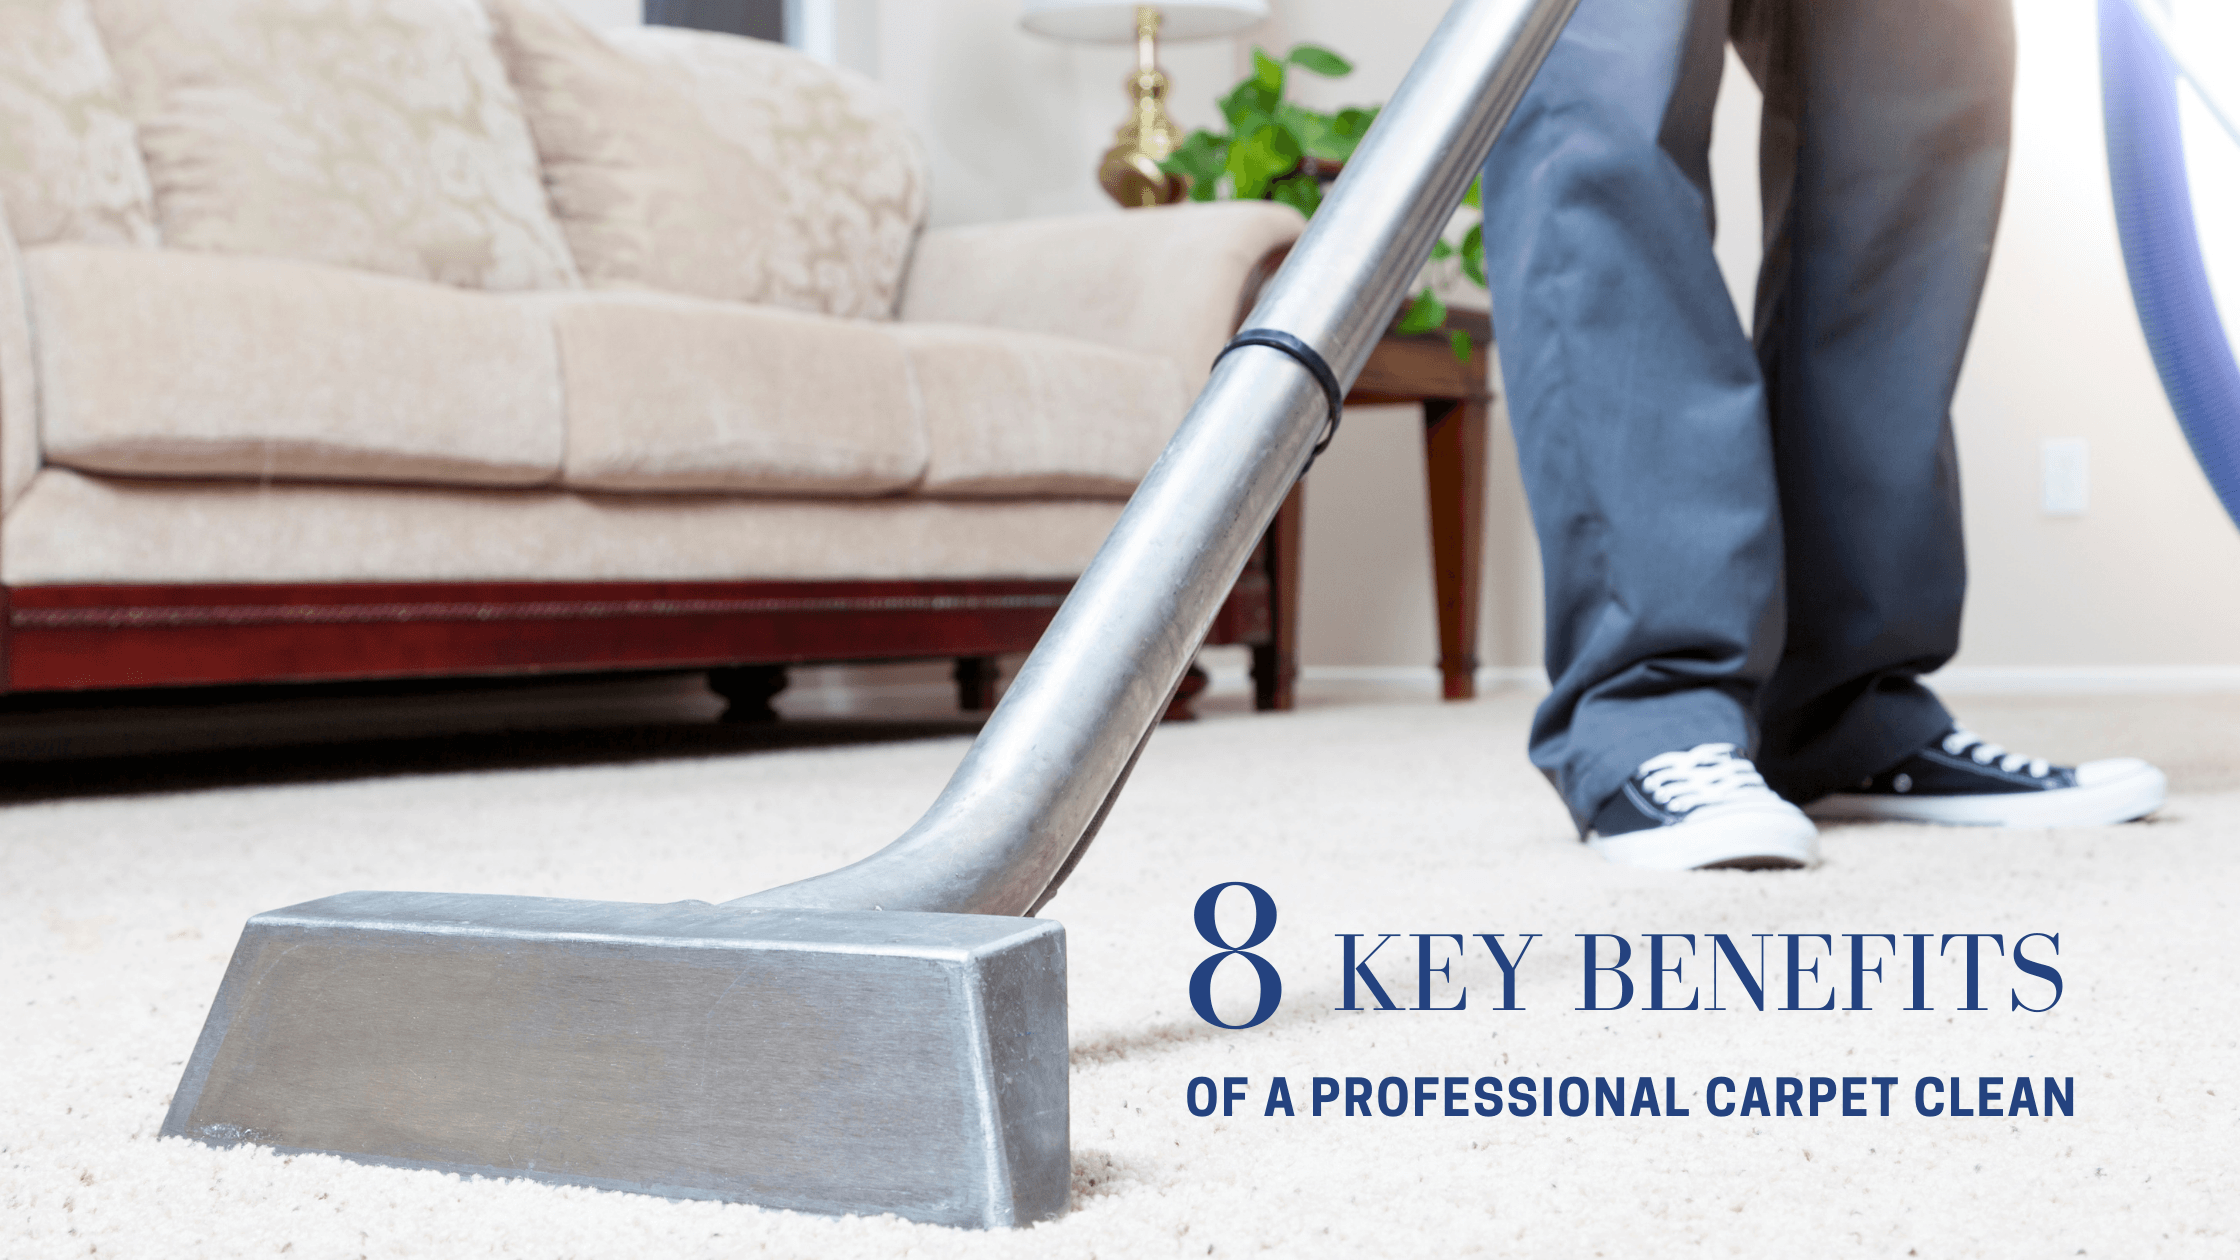 The 8 Key Benefits of a Professional Carpet Clean 12